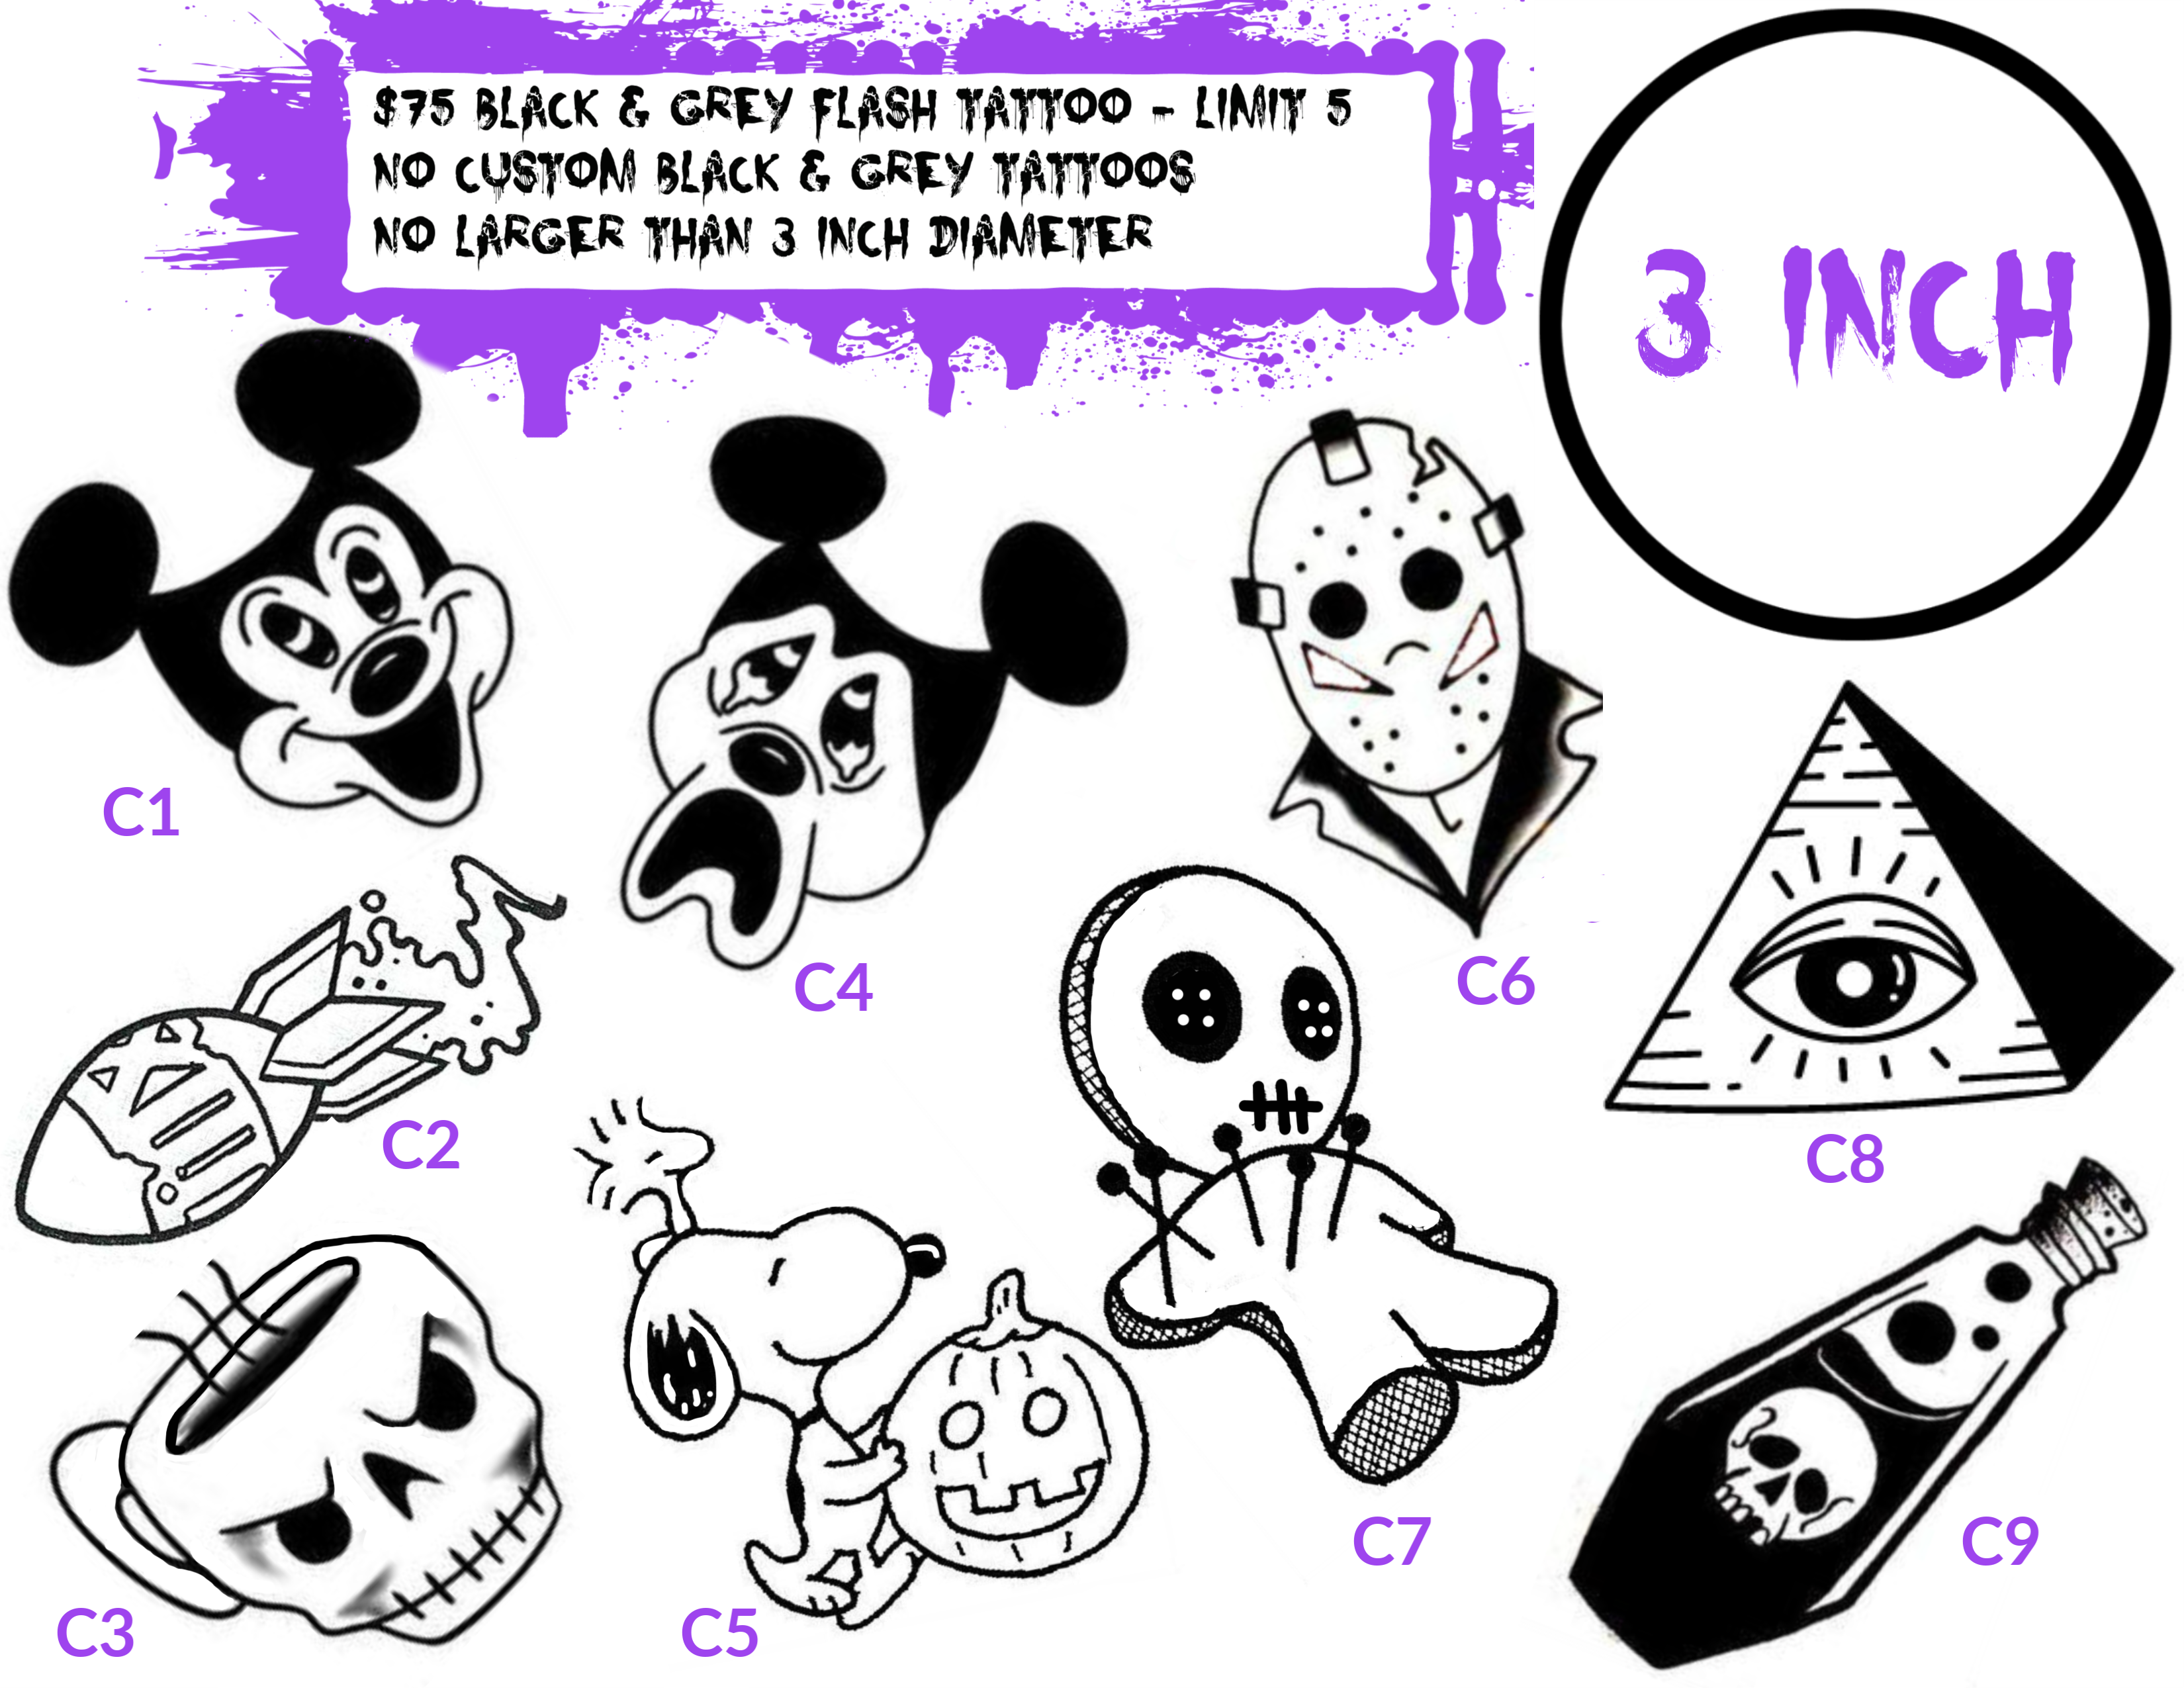 Friday the 13th flash My first flash piece and my thirteenth tattoo  Artist is Jesse from Anchors Aweigh in NC  rtattoos